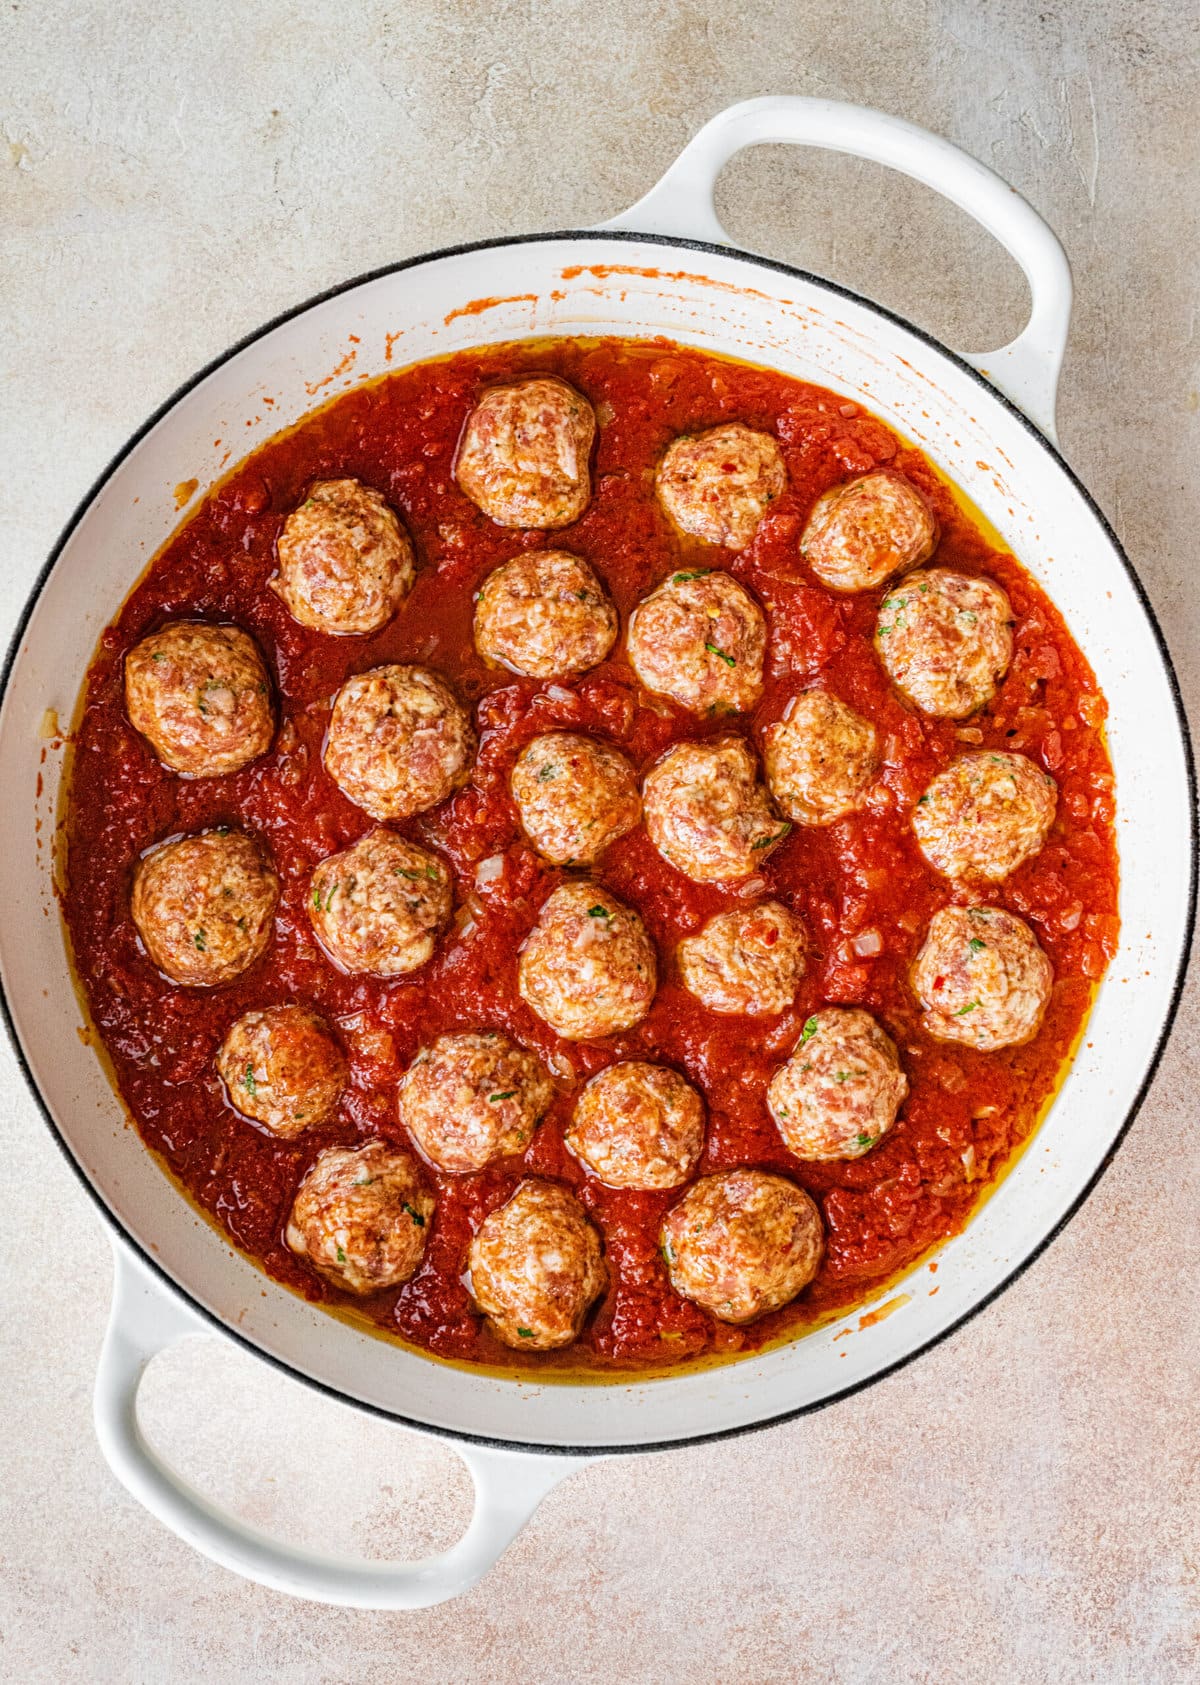 Process for making Italian Sausage Meatballs Recipe (In Sauce)- adding the raw meatballs to cook in sauce.